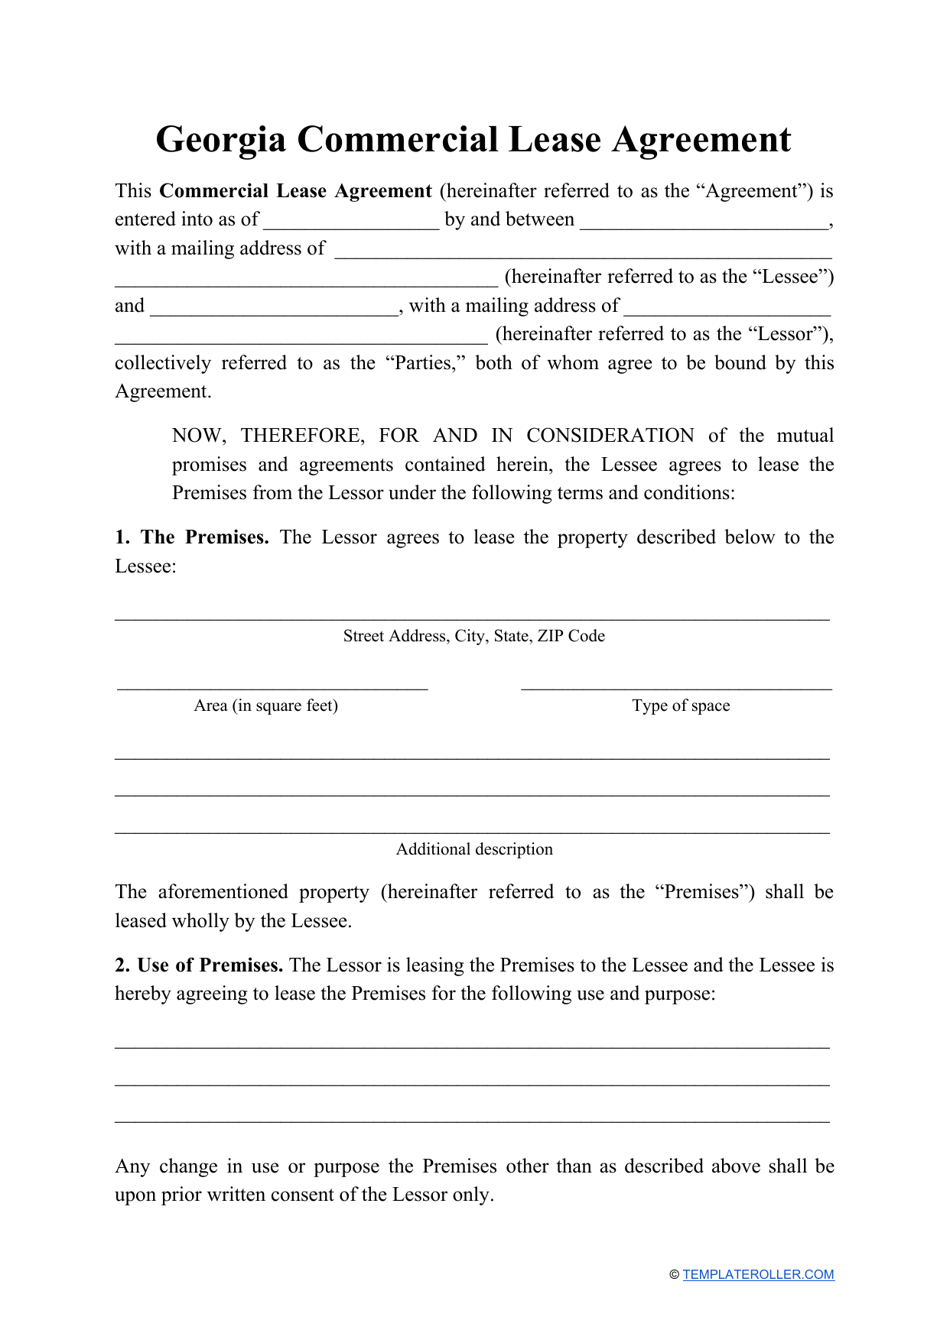 Commercial Lease Agreement Template - Georgia (United States), Page 1